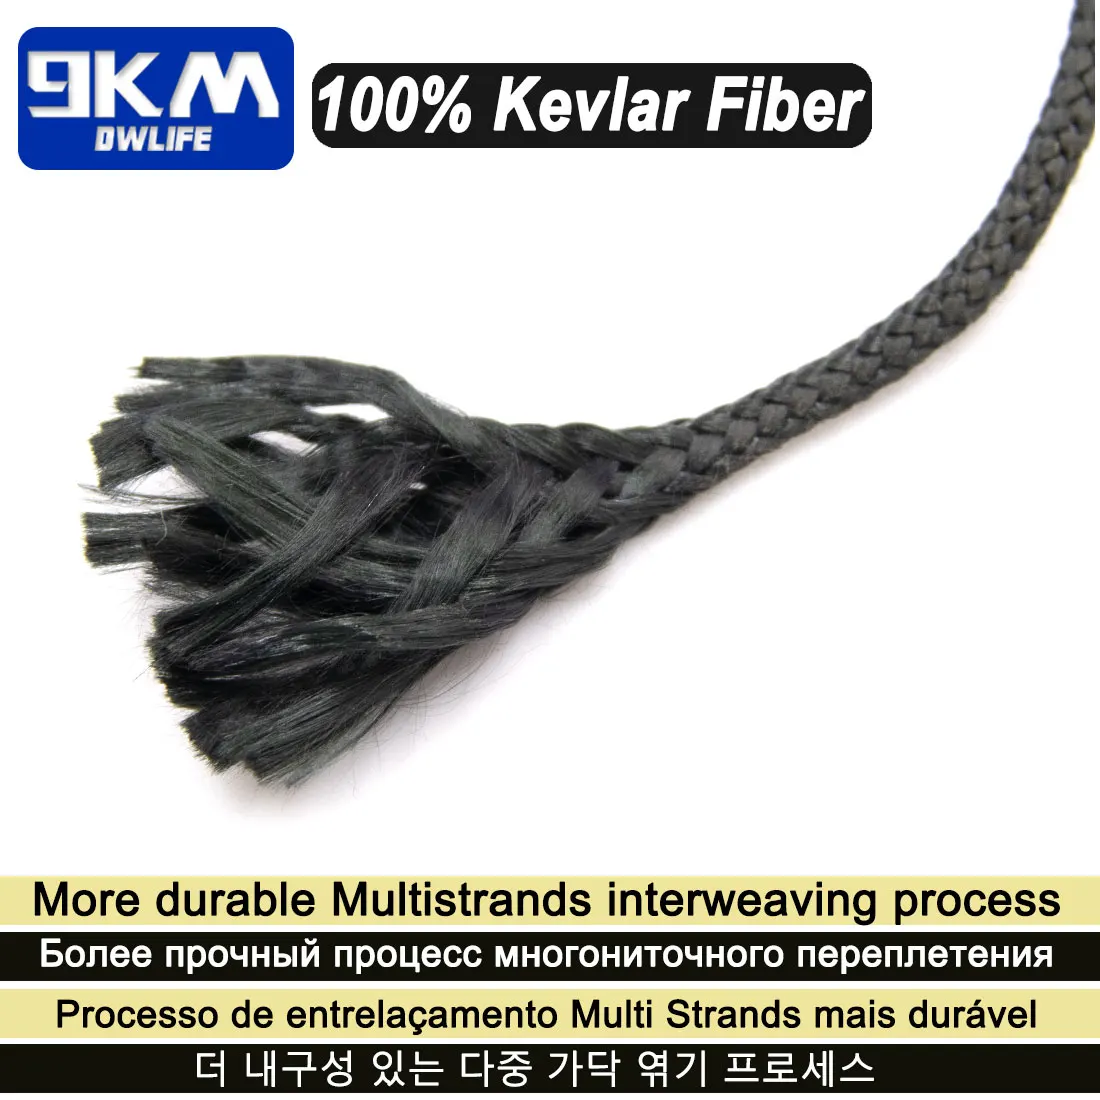 50Lbs-2000Lbs Black Kevlar Line Braided Fishing Assist Line High Tensile Strength Tactical Rope KiteRefractory Backpacking Cord images - 6